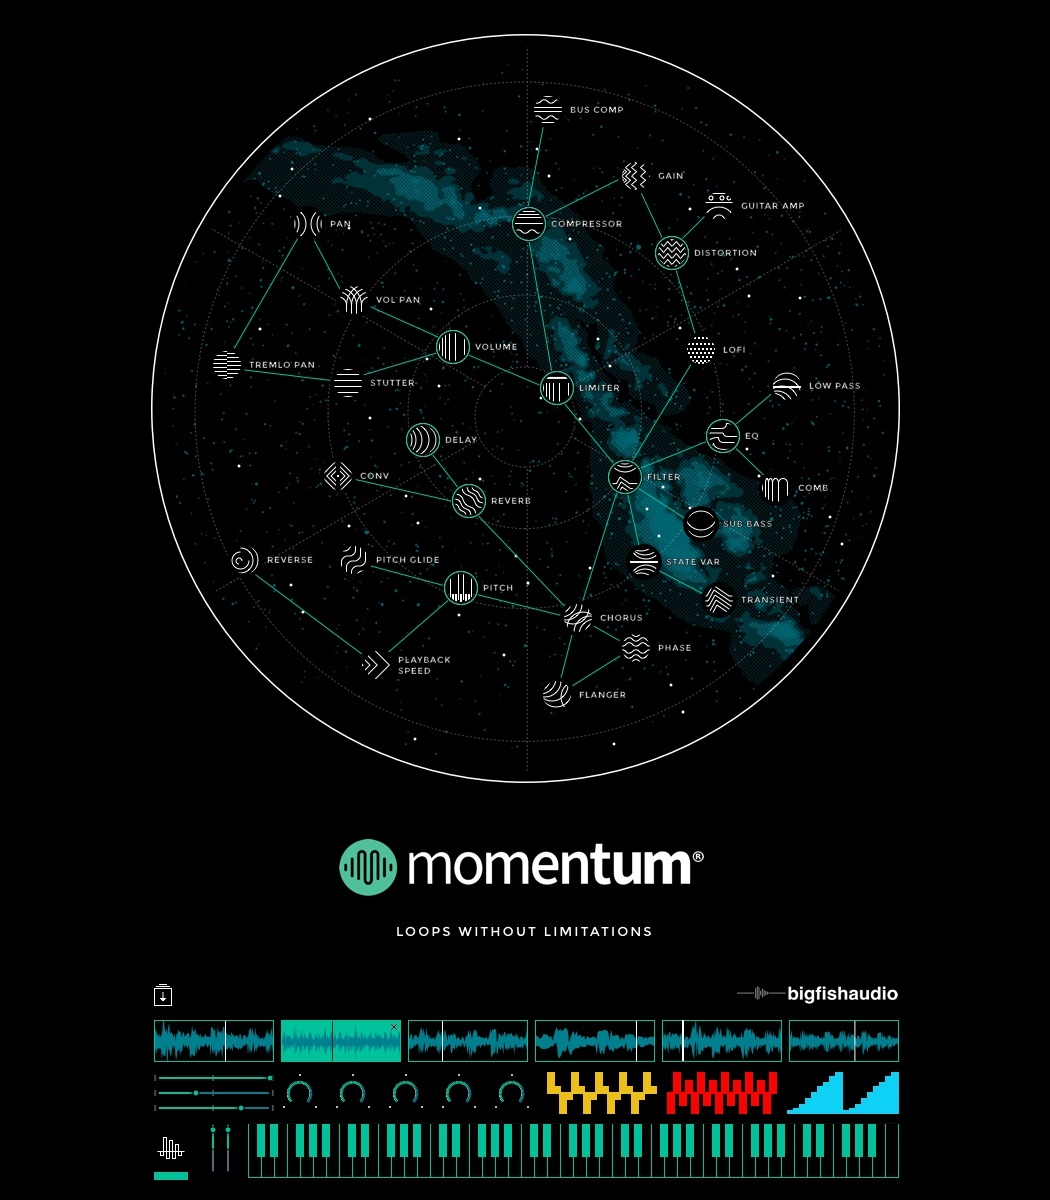 Momentum icons visualized as a constellation